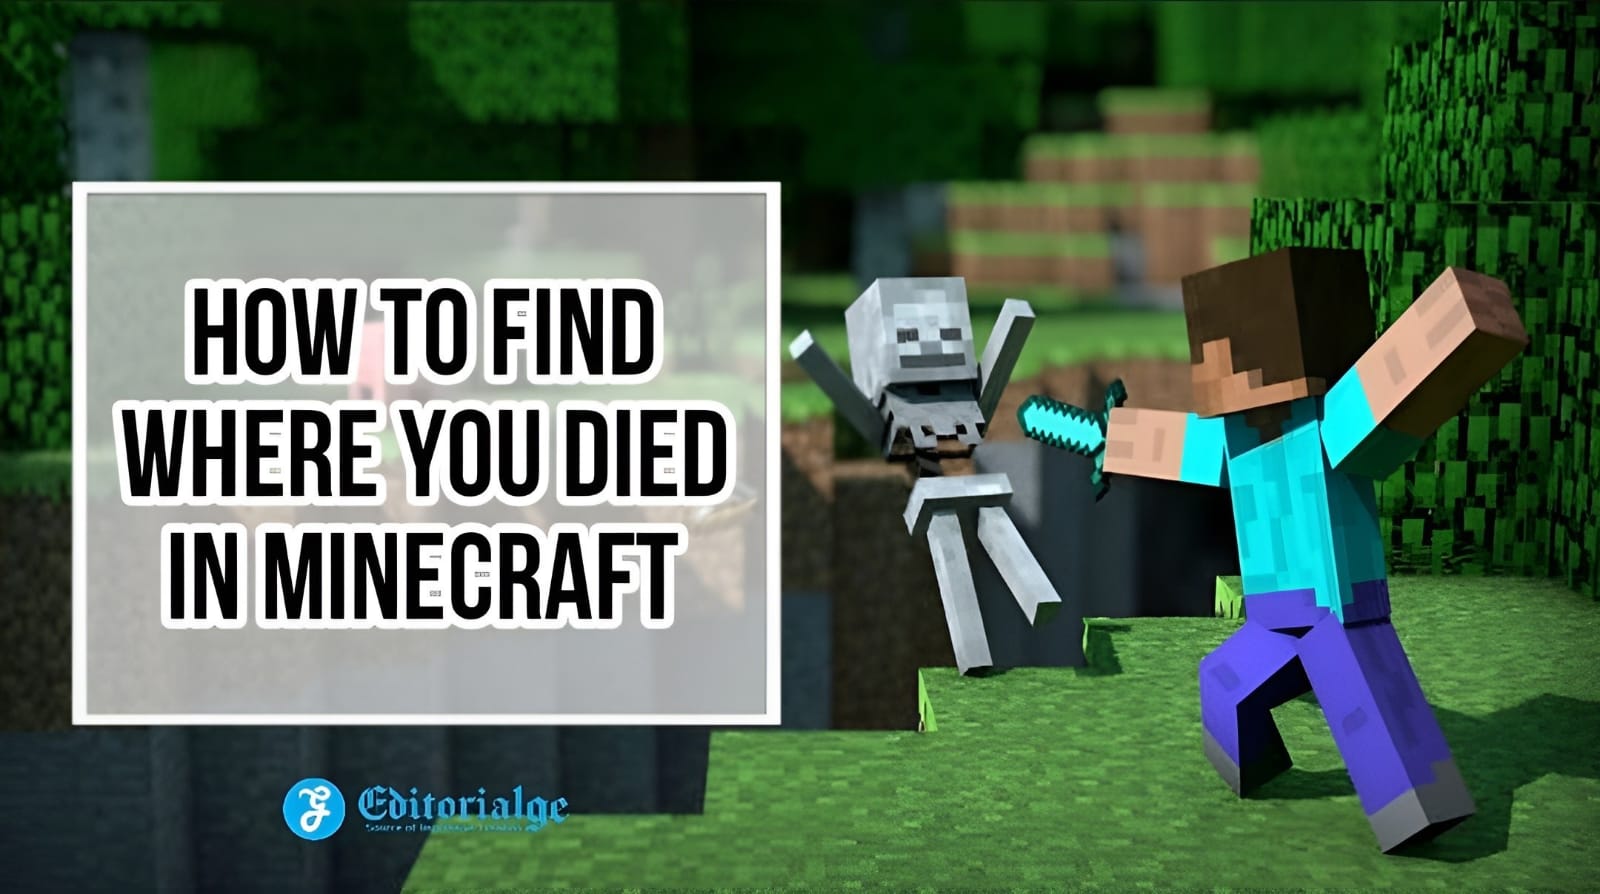 How to Find Where you Died in Minecraft